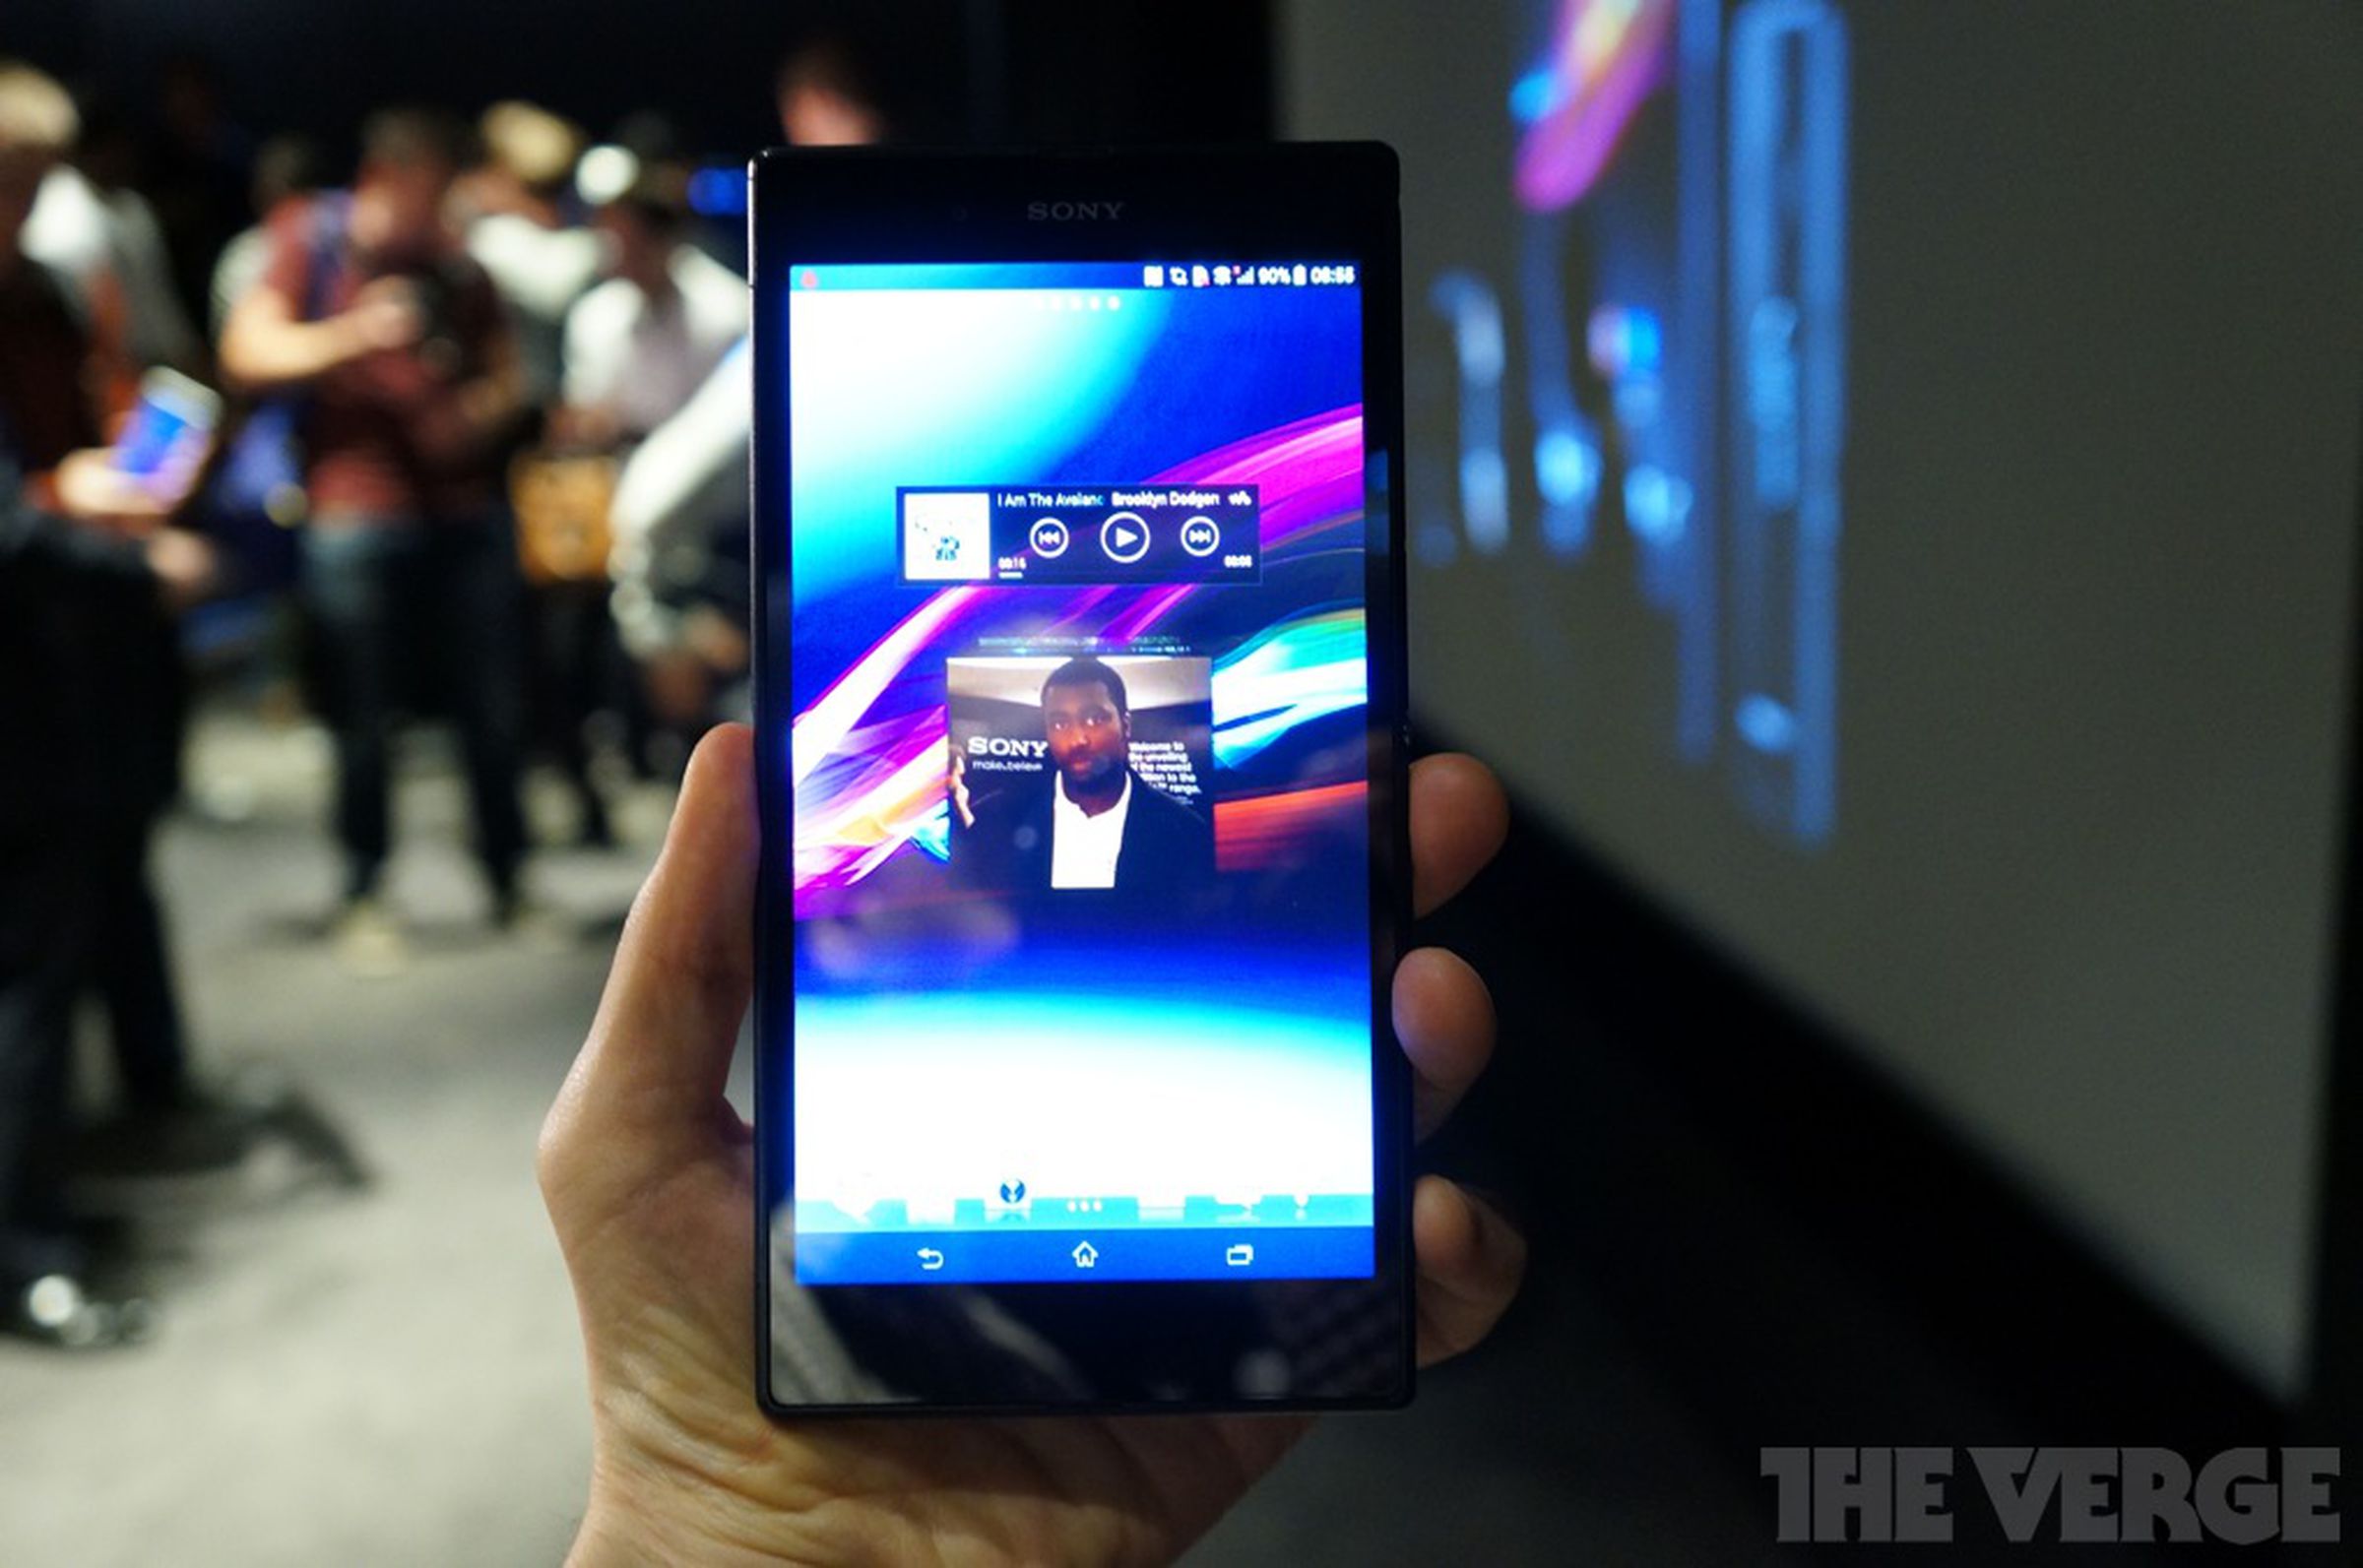 Sony Xperia Z Ultra hands-on pictures